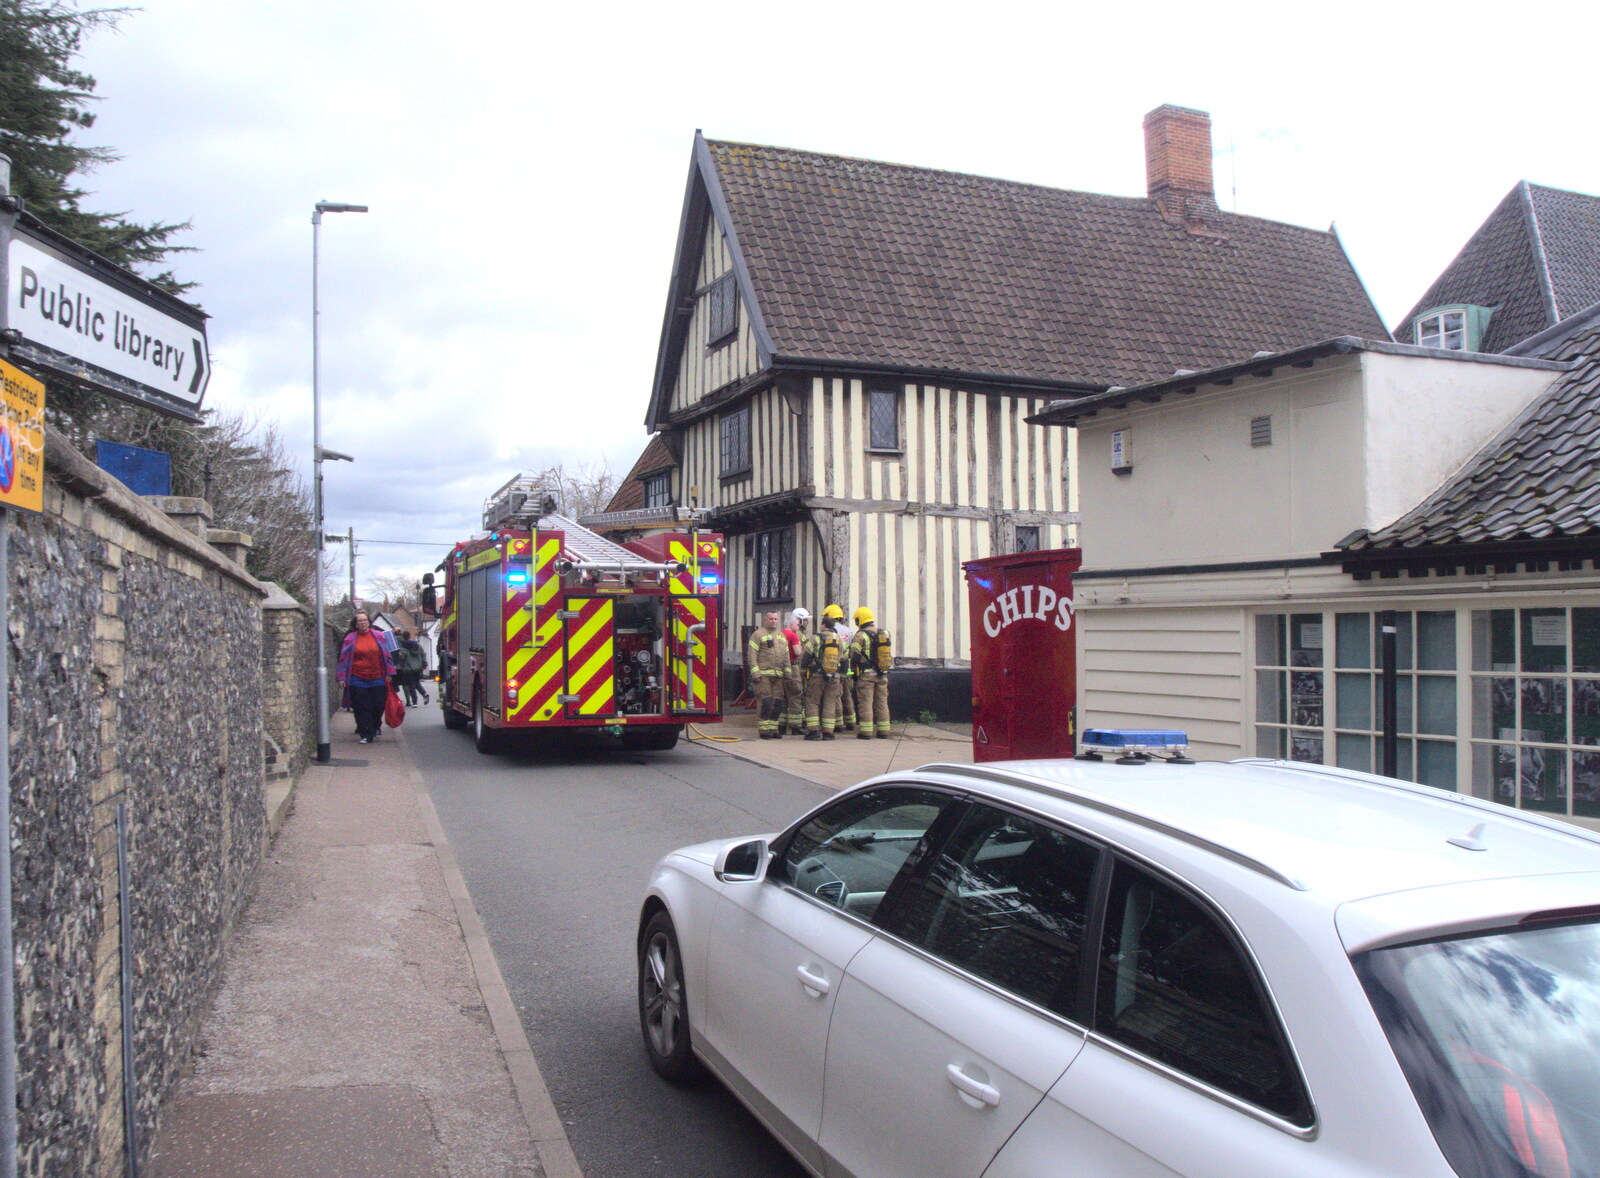 A police car blocks off Church Street from Dolphin House Fire and an Escape Room, Diss and Norwich - 26th March 2023